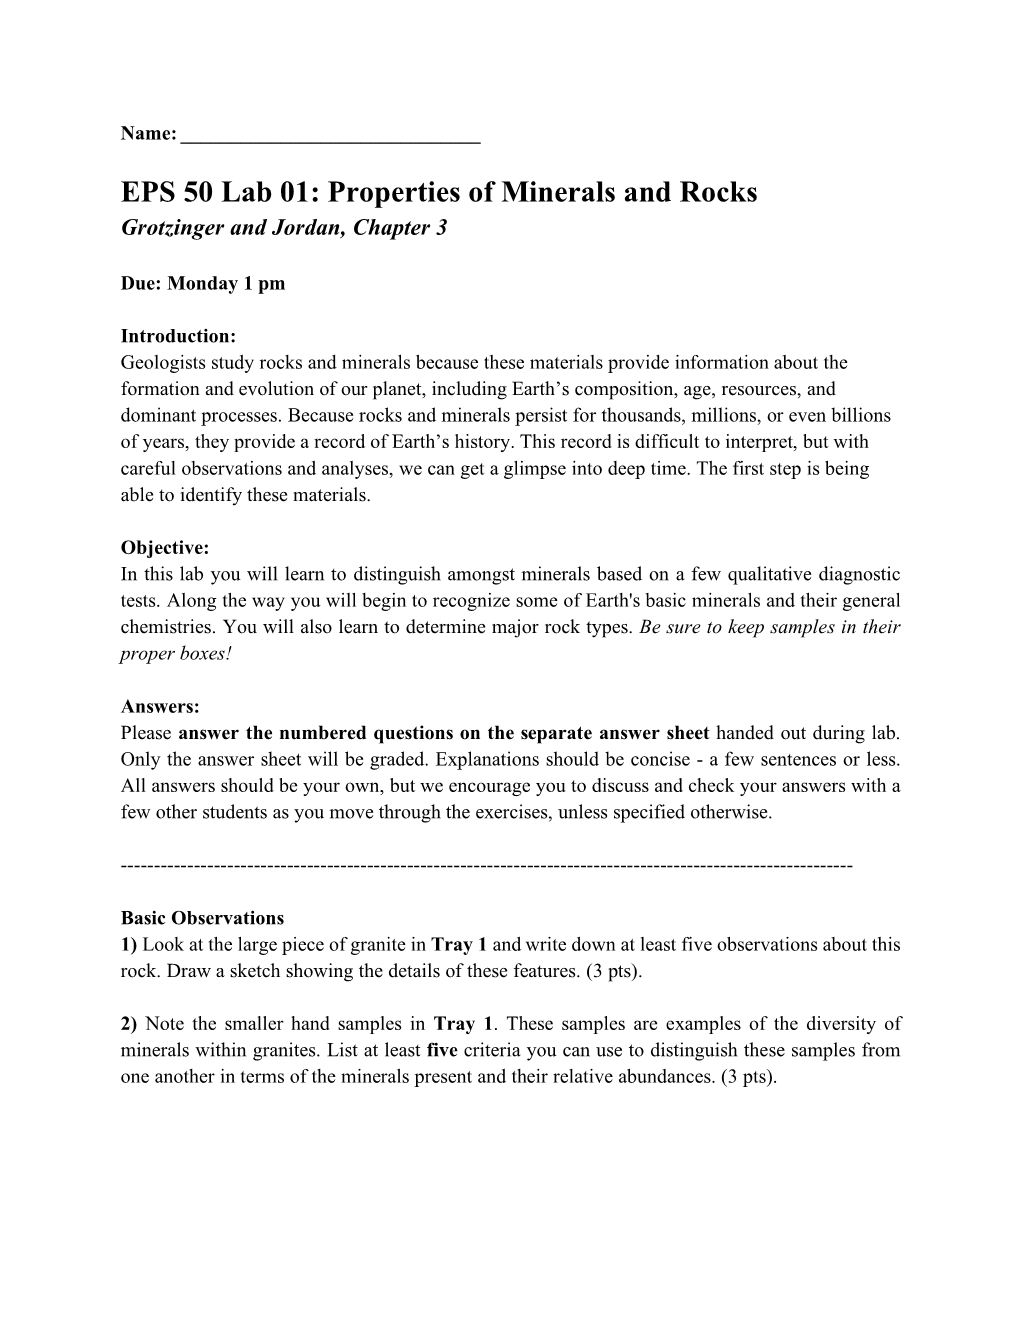 EPS 50 Lab 01: Properties of Minerals and Rocks Grotzinger and Jordan, Chapter 3